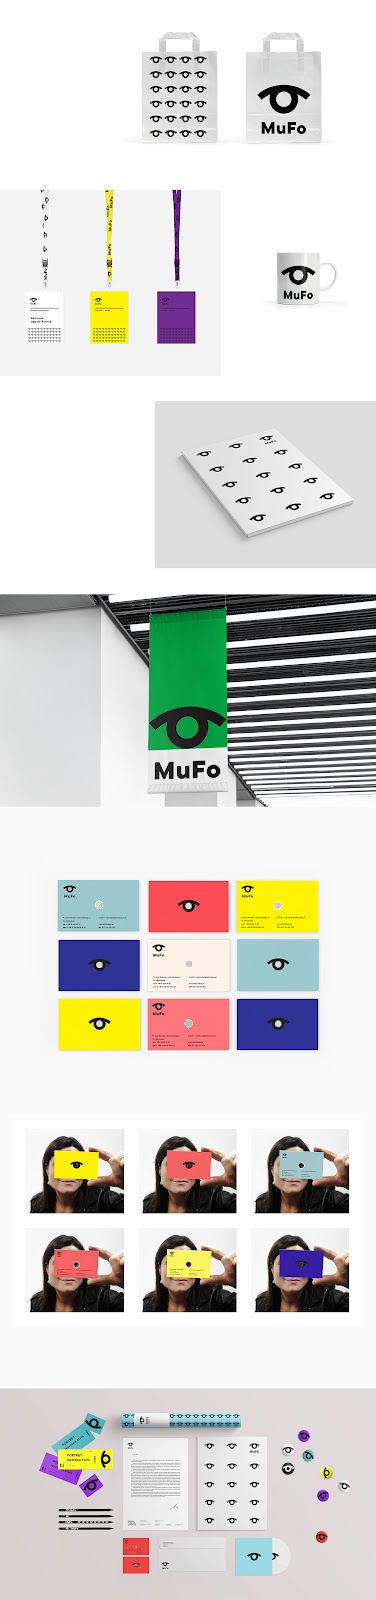 Artifact from the MuFo: Branding and Visual Identity for Photography Museum article on Abduzeedo